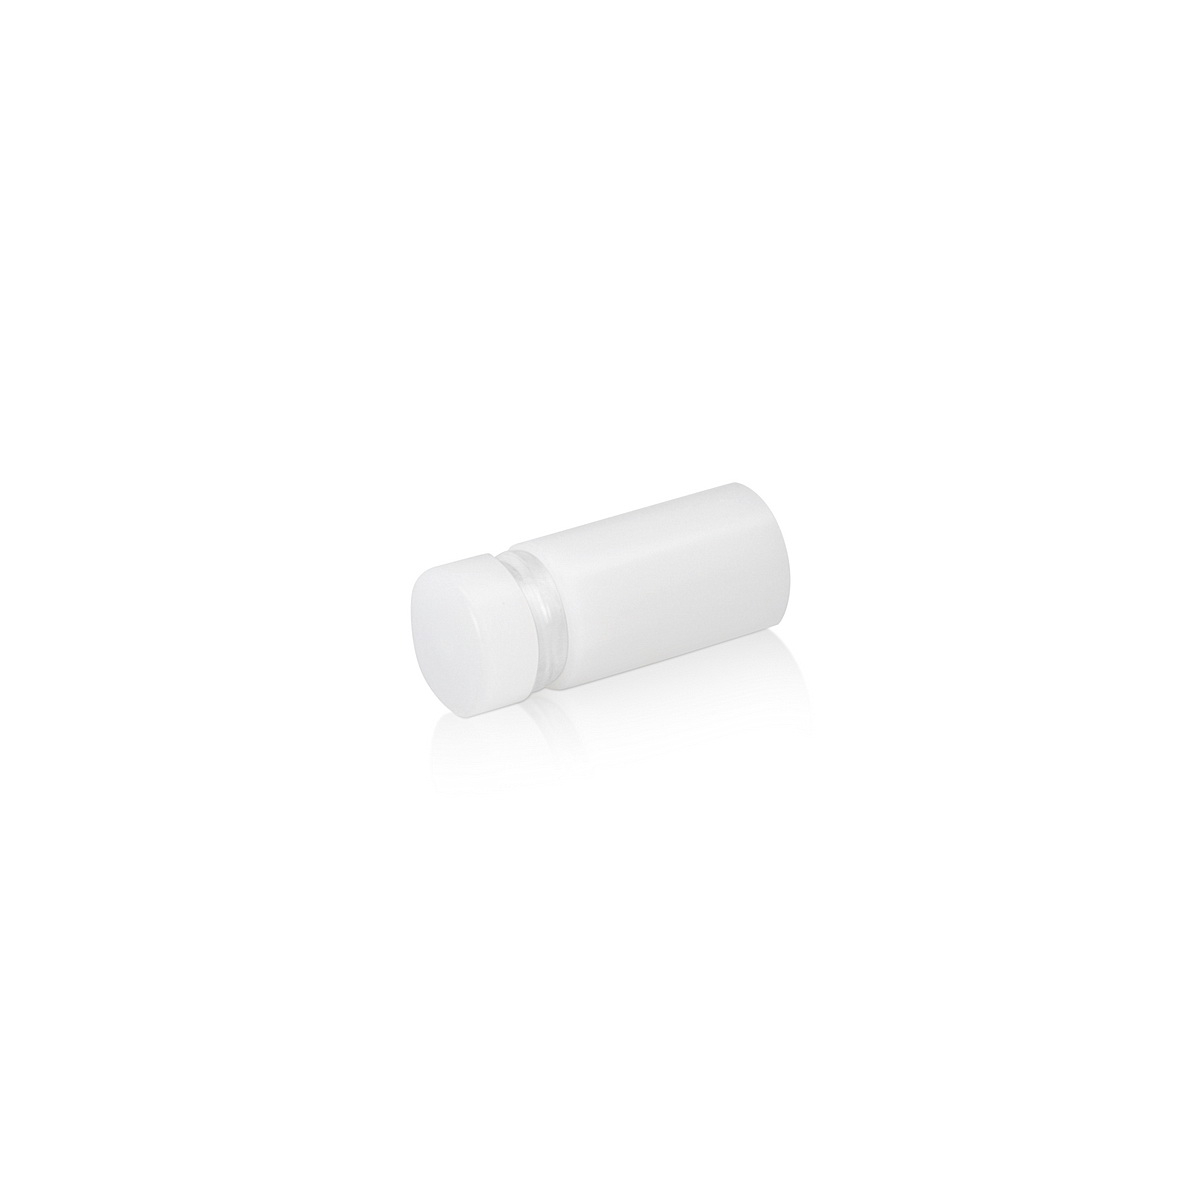 1/2'' Diameter X 1'' Barrel Length, White Acrylic Standoff. Easy Fasten Standoff (For Inside Use Only) Tamper Proof [Required Material Hole Size: 3/8'']